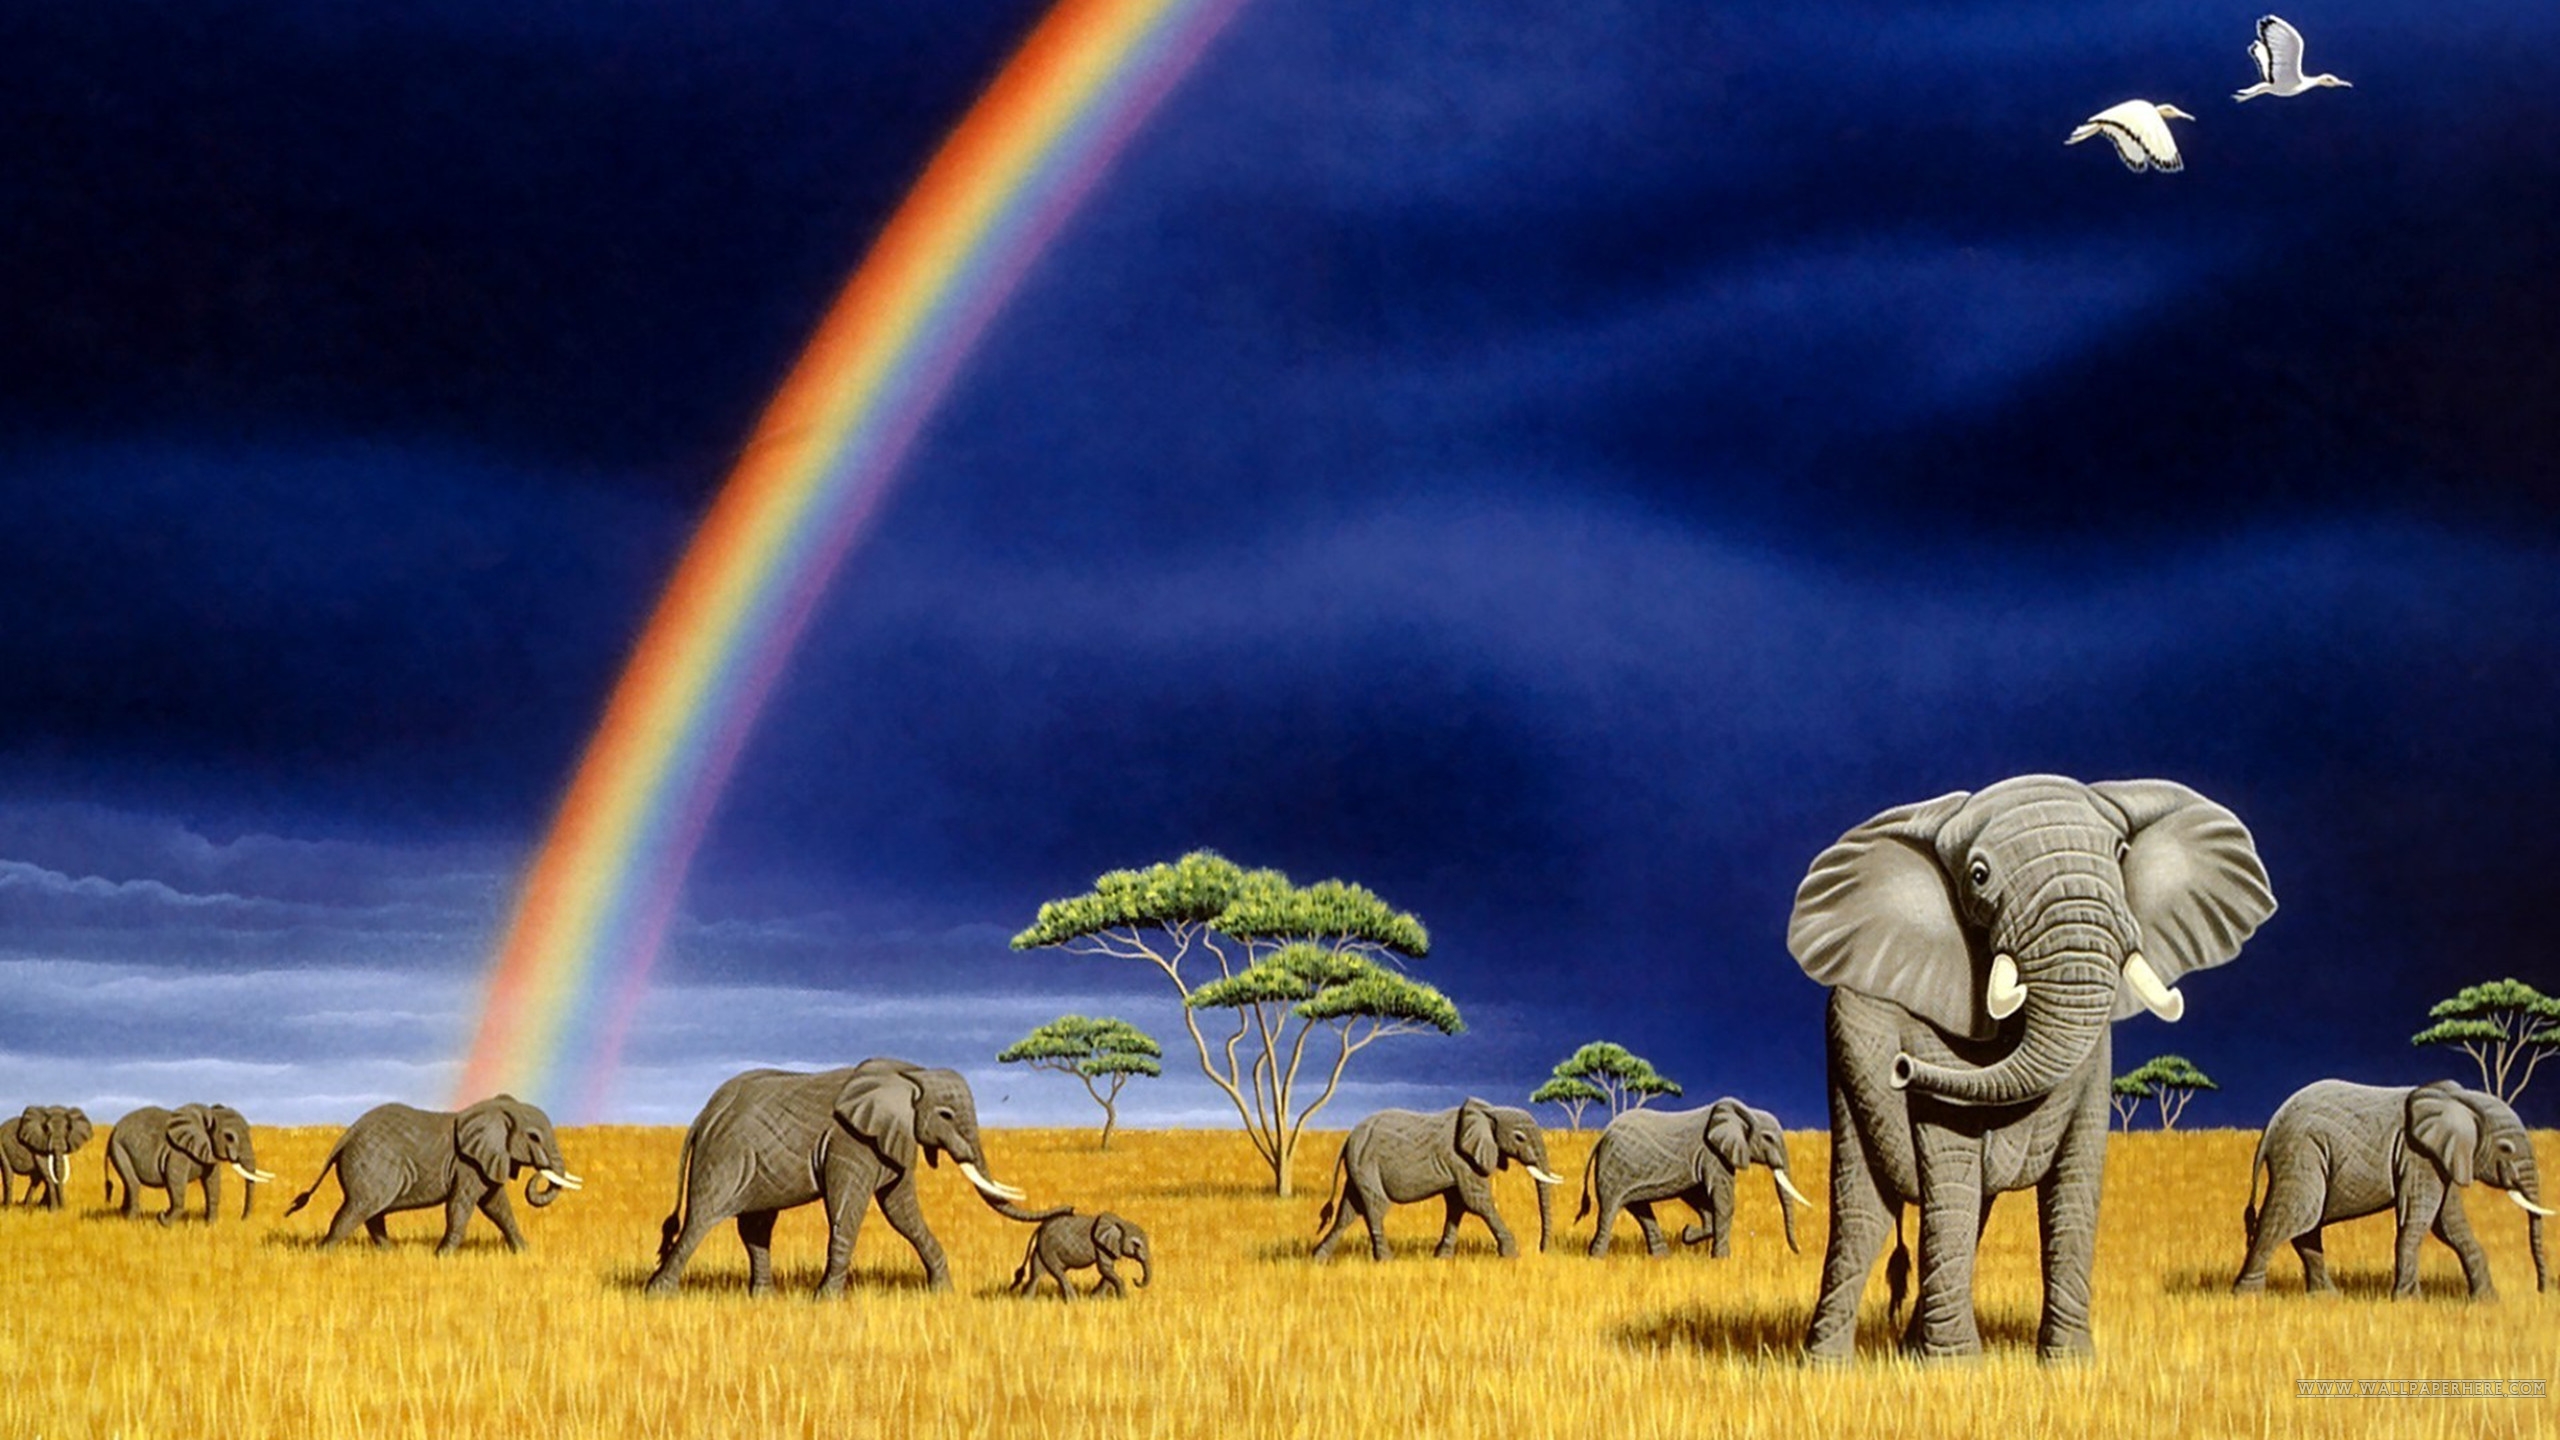 on rainbows, chaos, Prof Dawkins and the tail end of an elephant